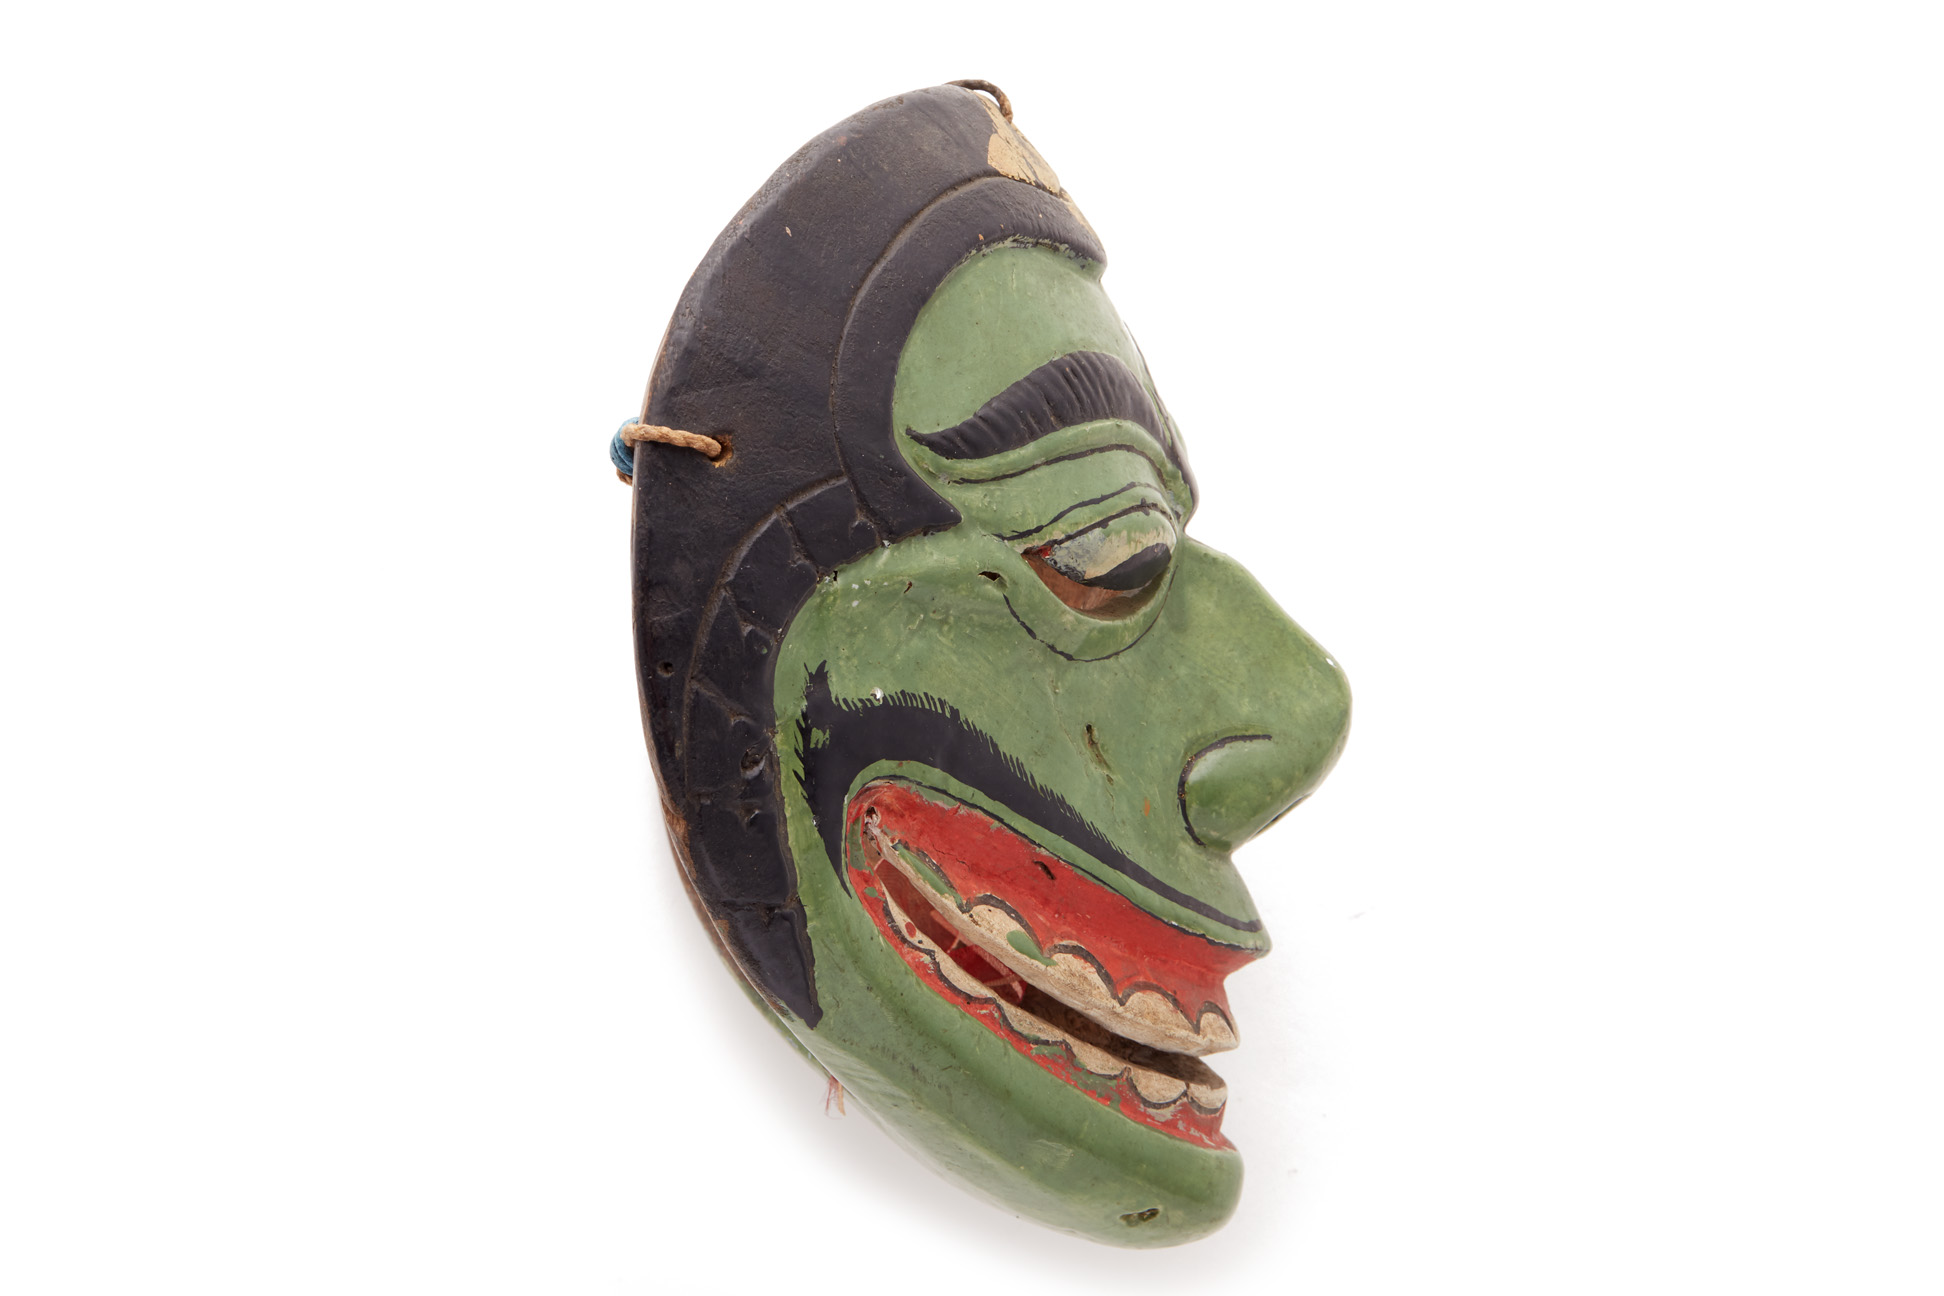 AN INDONESIAN TOPENG DANCE MASK OF A CLOWN CHARACTER - Image 5 of 6